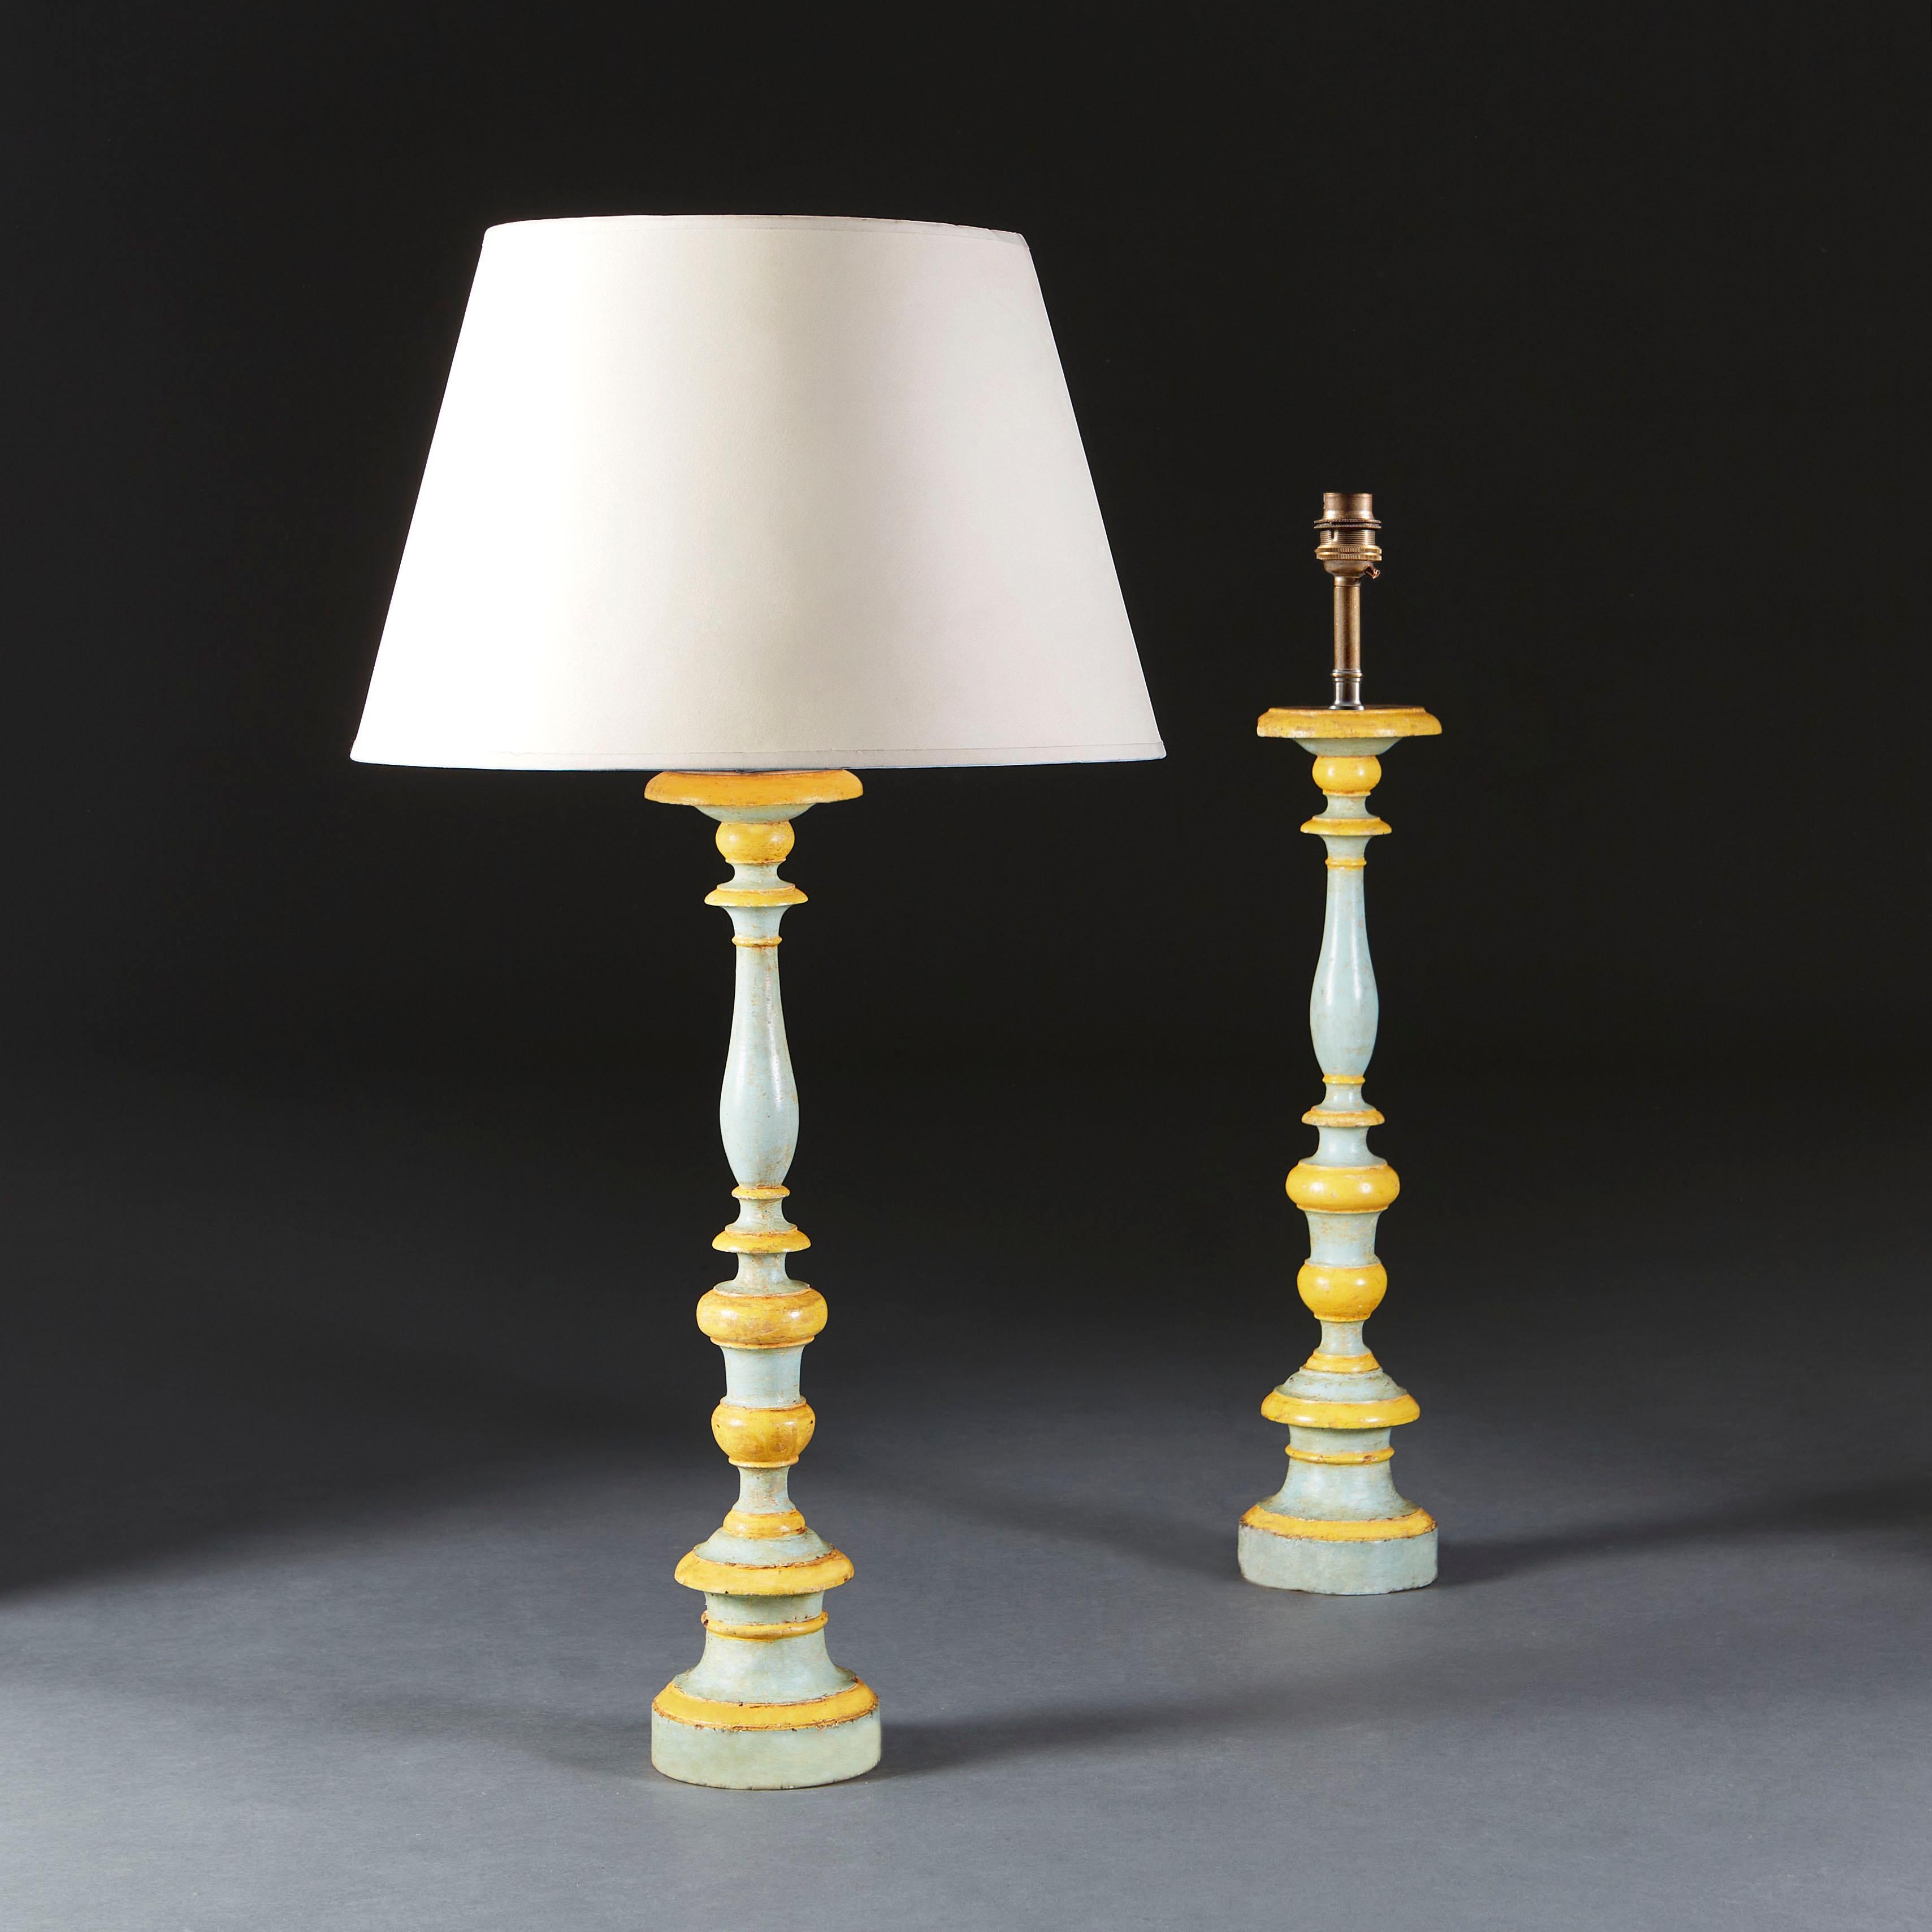 A unusual pair of late eighteenth century turned candlesticks, with original blue and yellow paintwork, now converted as lamps.

Currently wired for the UK.

Please note: Lampshades not included.